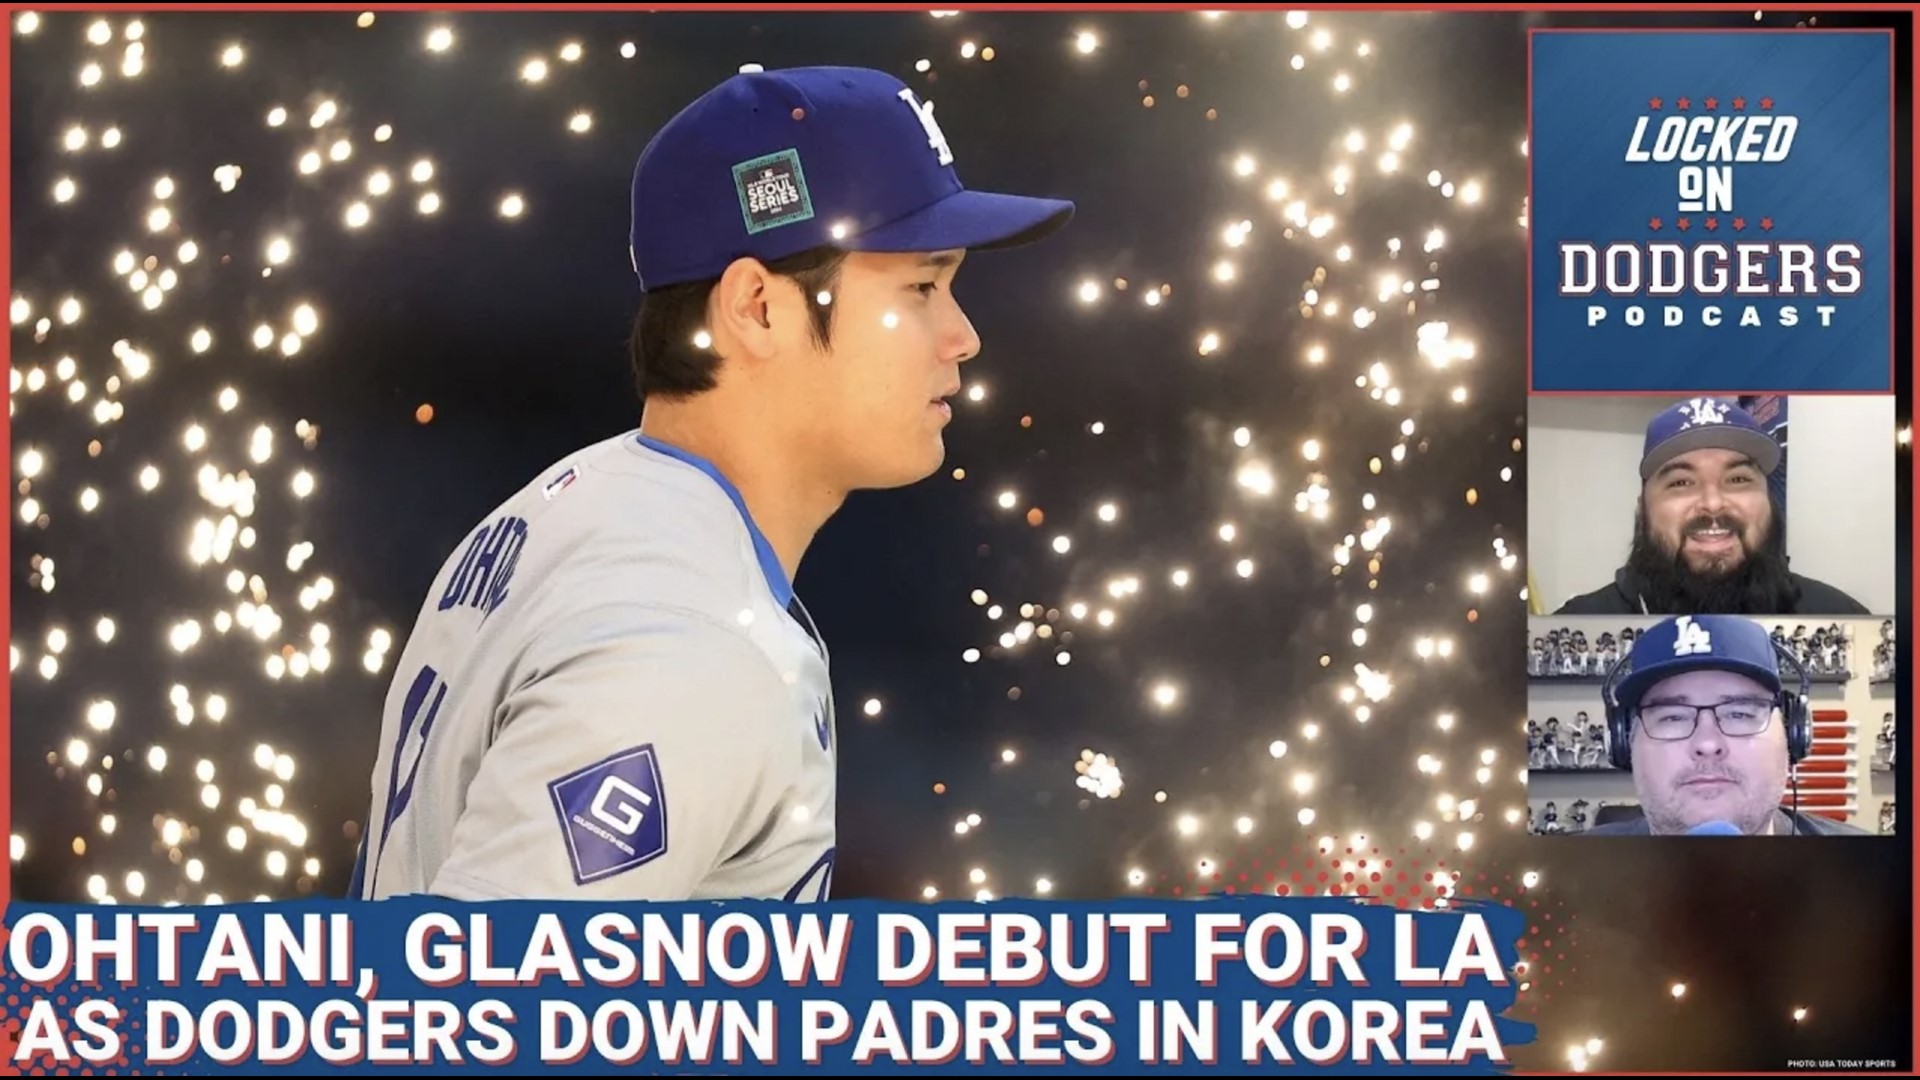 The Los Angeles Dodgers started their season (and Shohei Ohtani's Dodgers career) off with a win in Korea. Ohtani had two hits and an RBI